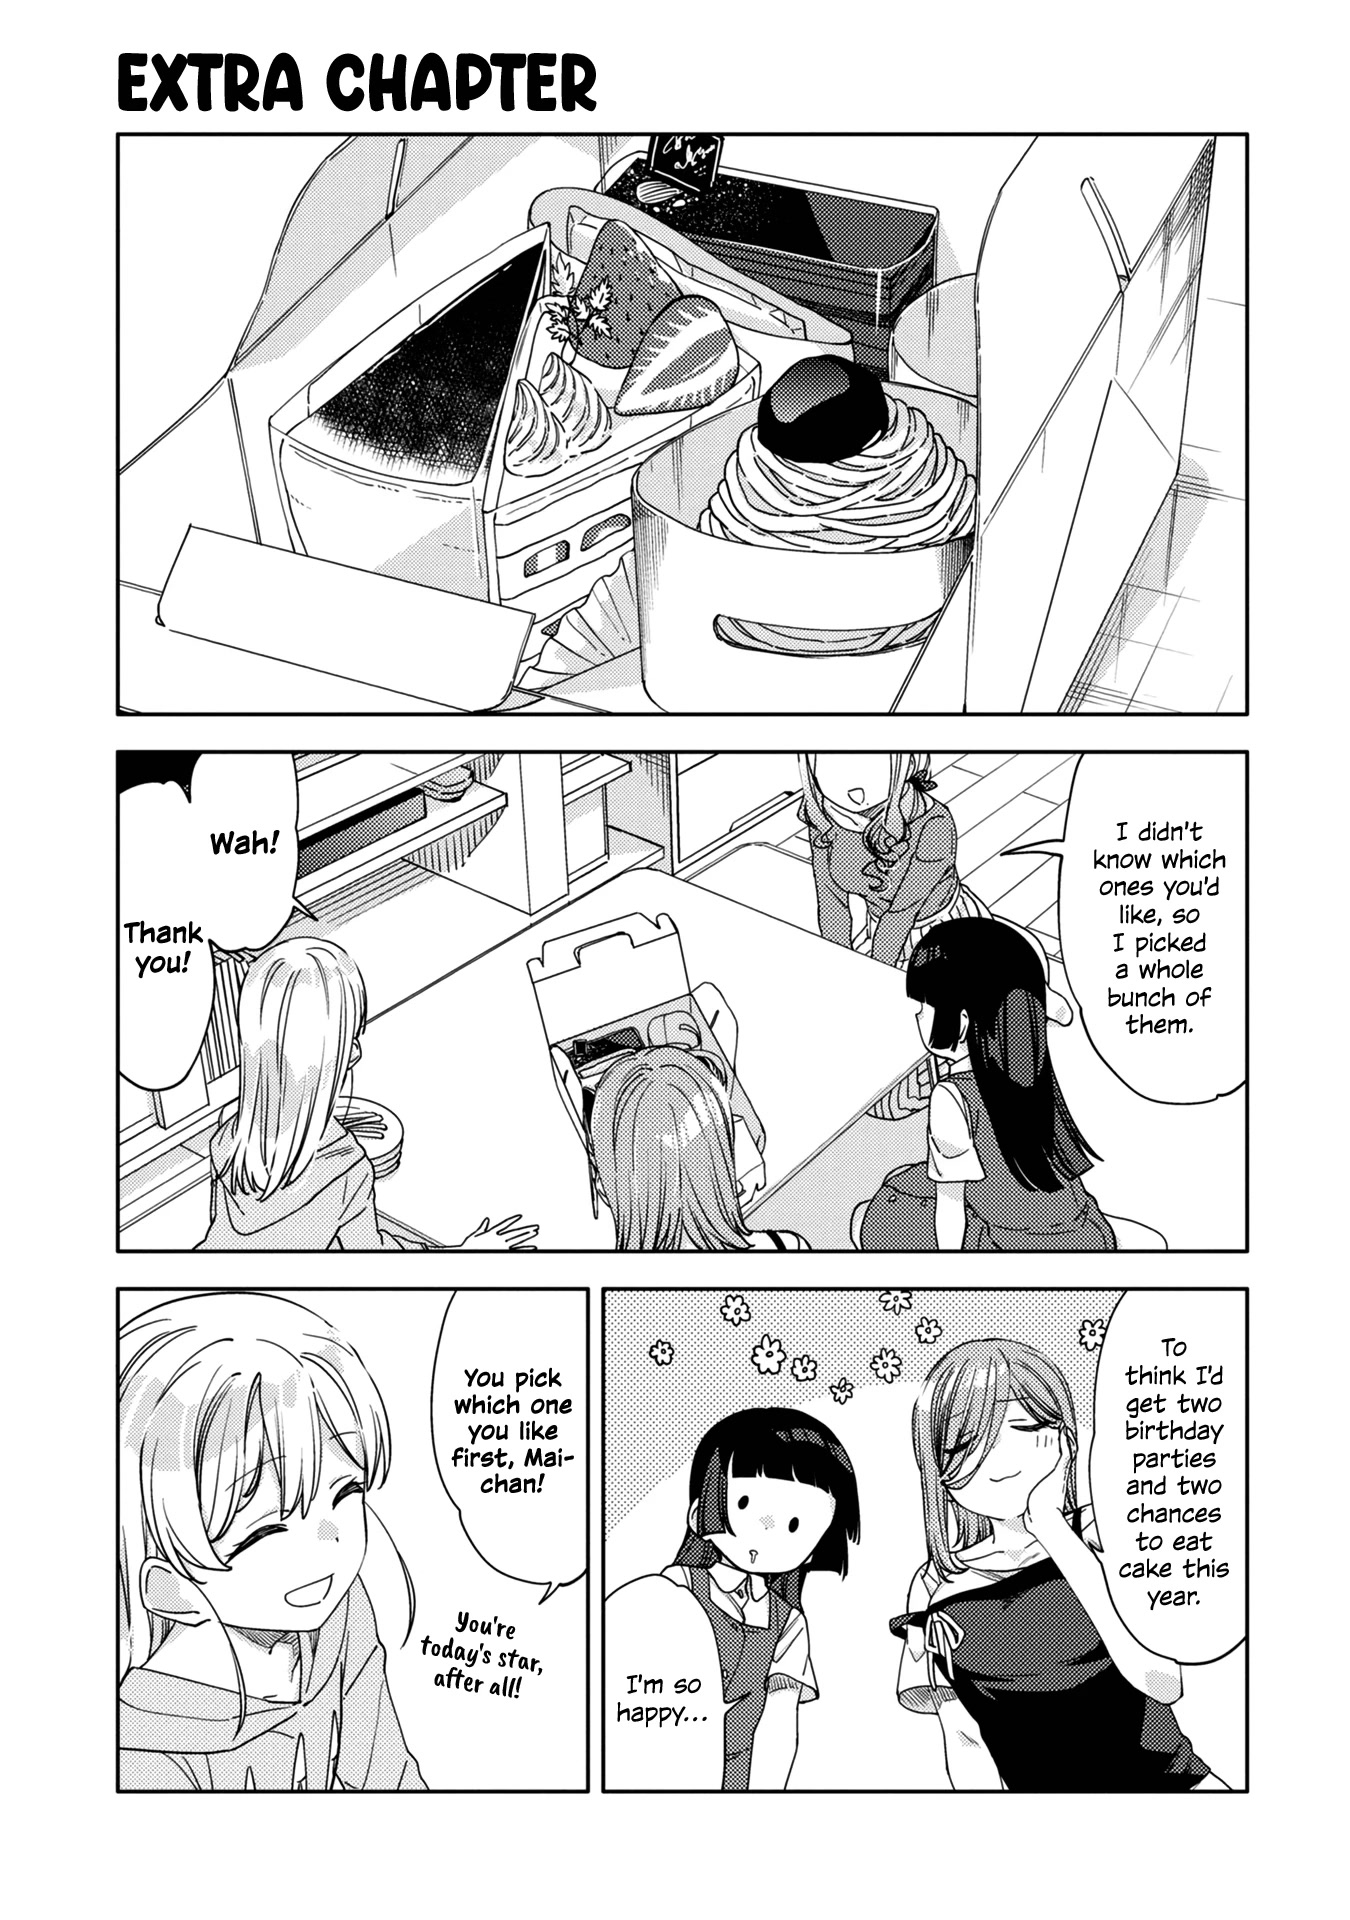 Be Careful, Onee-San. Chapter 16.1: Volume 2 Extras - Picture 1